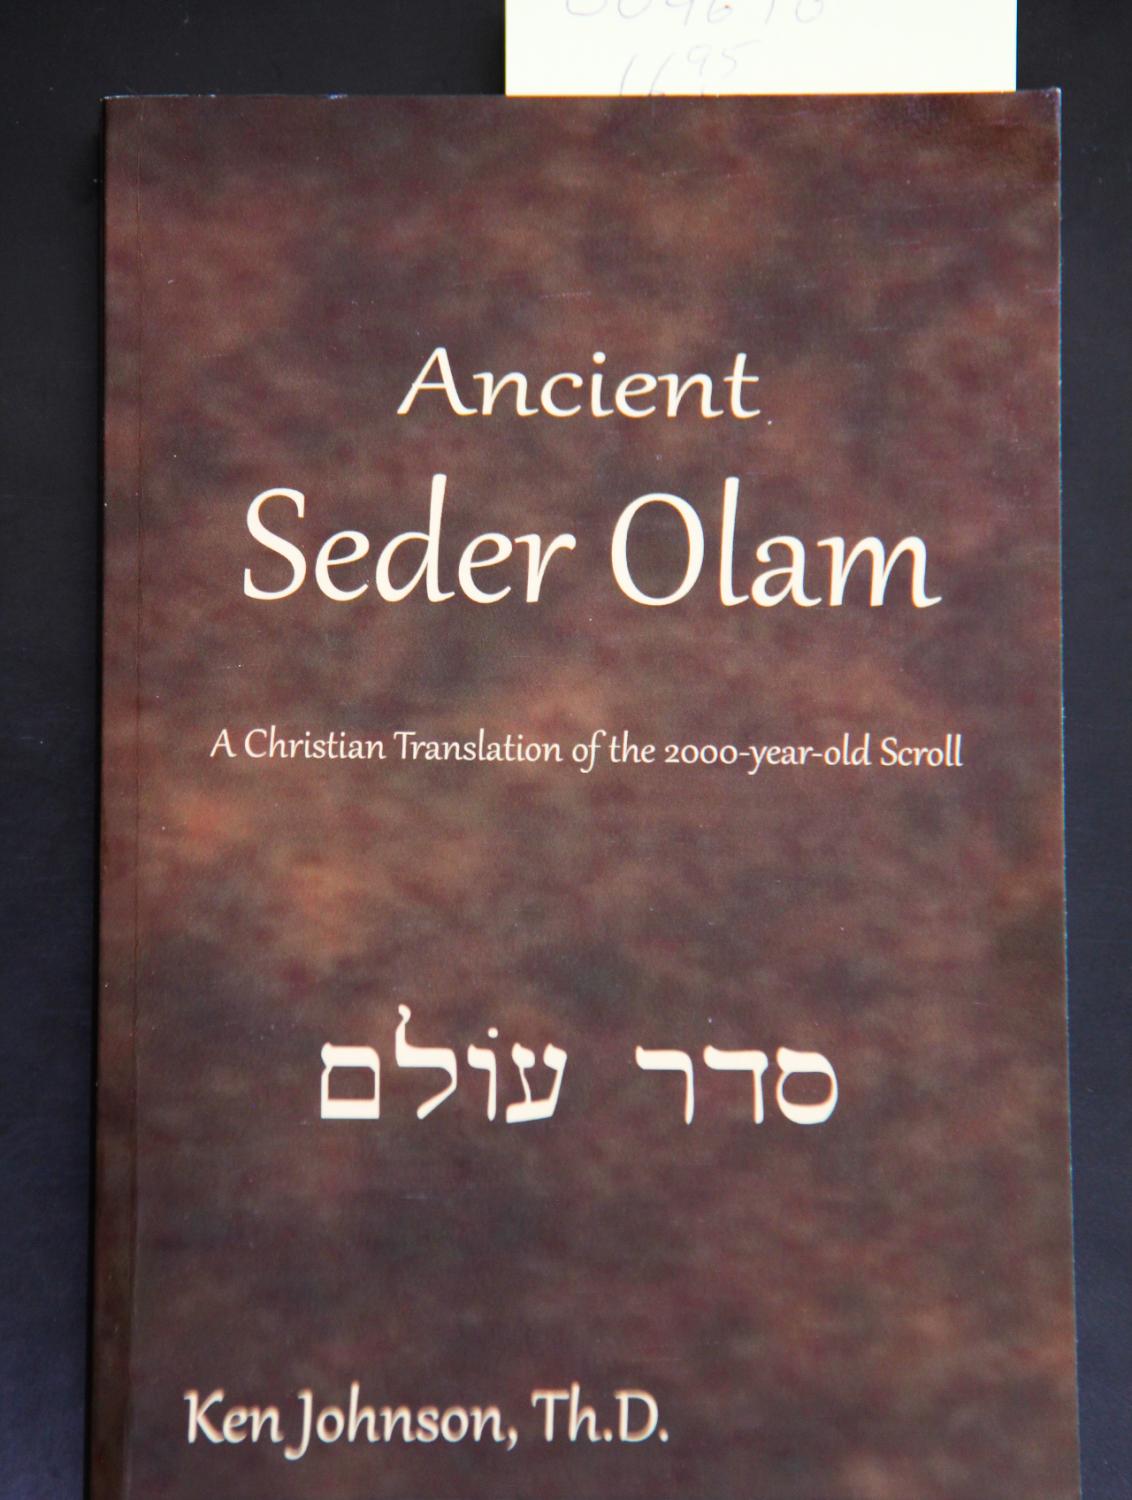 Ancient Seder Olam: A Christian Translation of the 2000-year-old Scroll